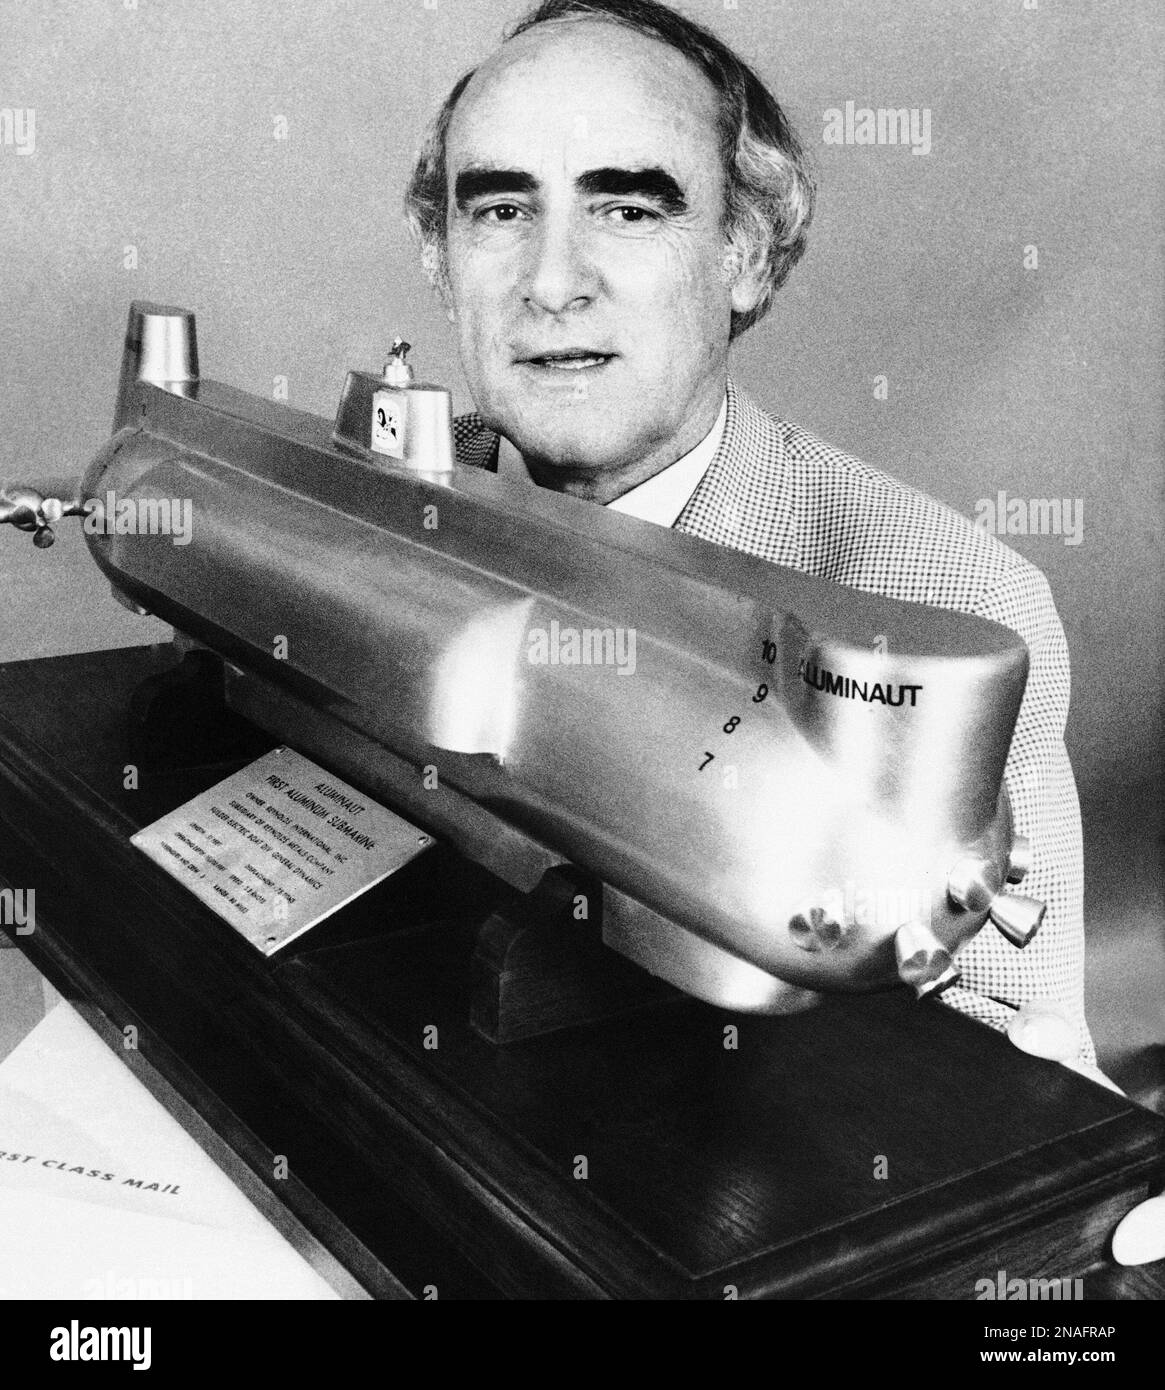 Jack Grimm, Texas oilman and consummate wildcatter, looks at a model Aluminaut, in New York on August 22, 1980. The Aluminaut is the submarine which will be used in Grimm's search for the Titanic. (AP Photo/Dave Pickoff) Stock Photo